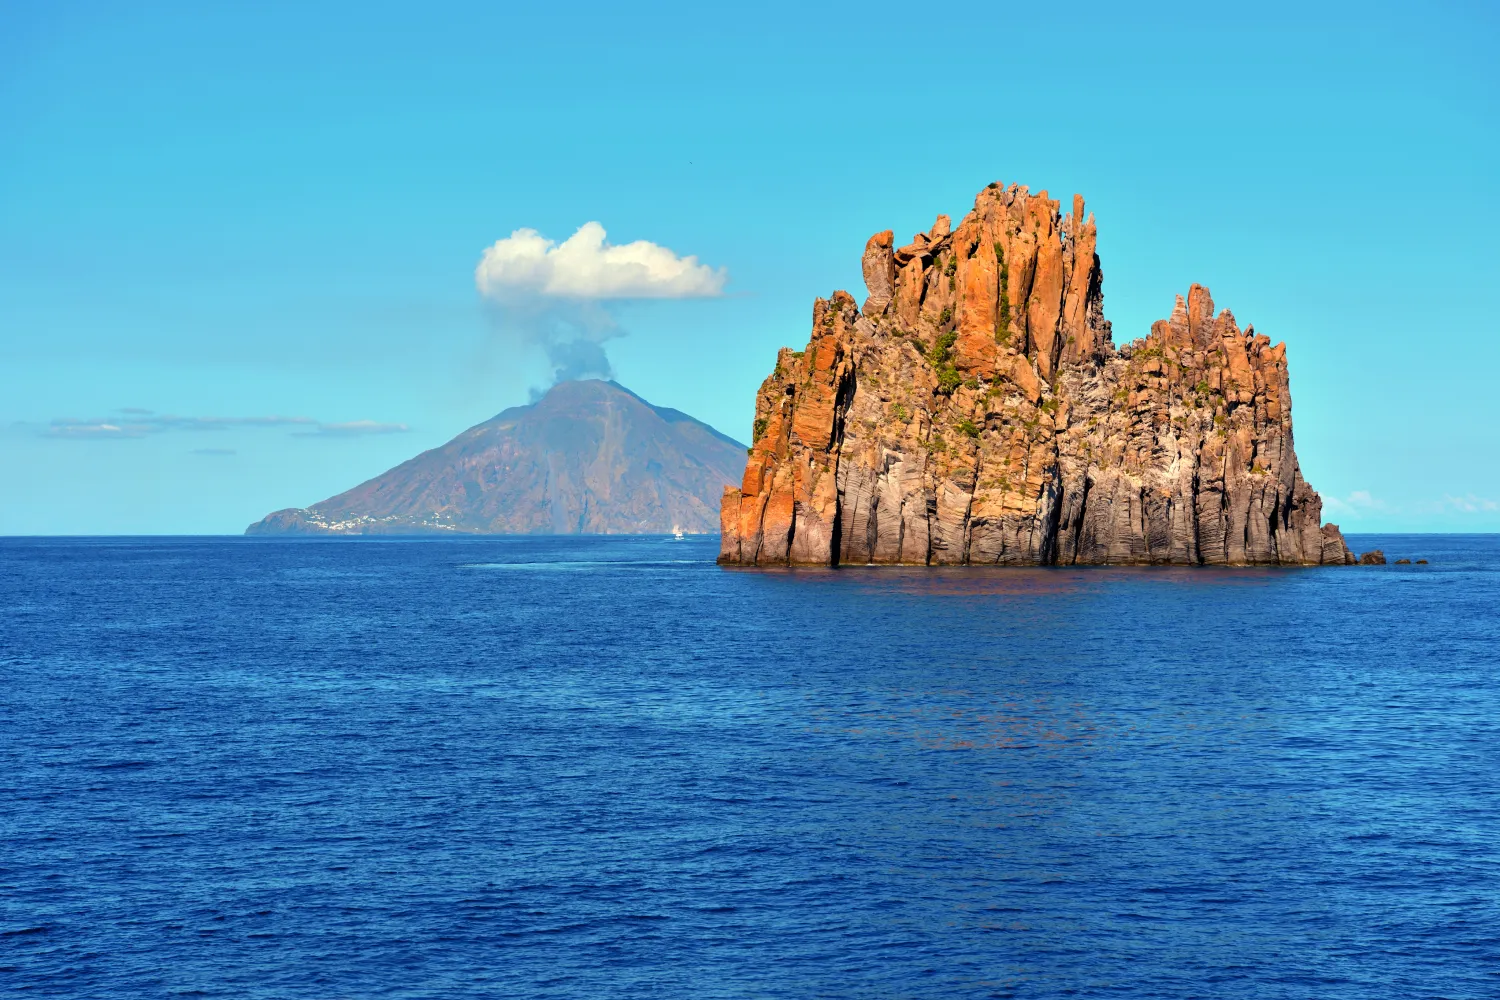 distant view of the island of Stromboli and the volcano in mount Stromboli